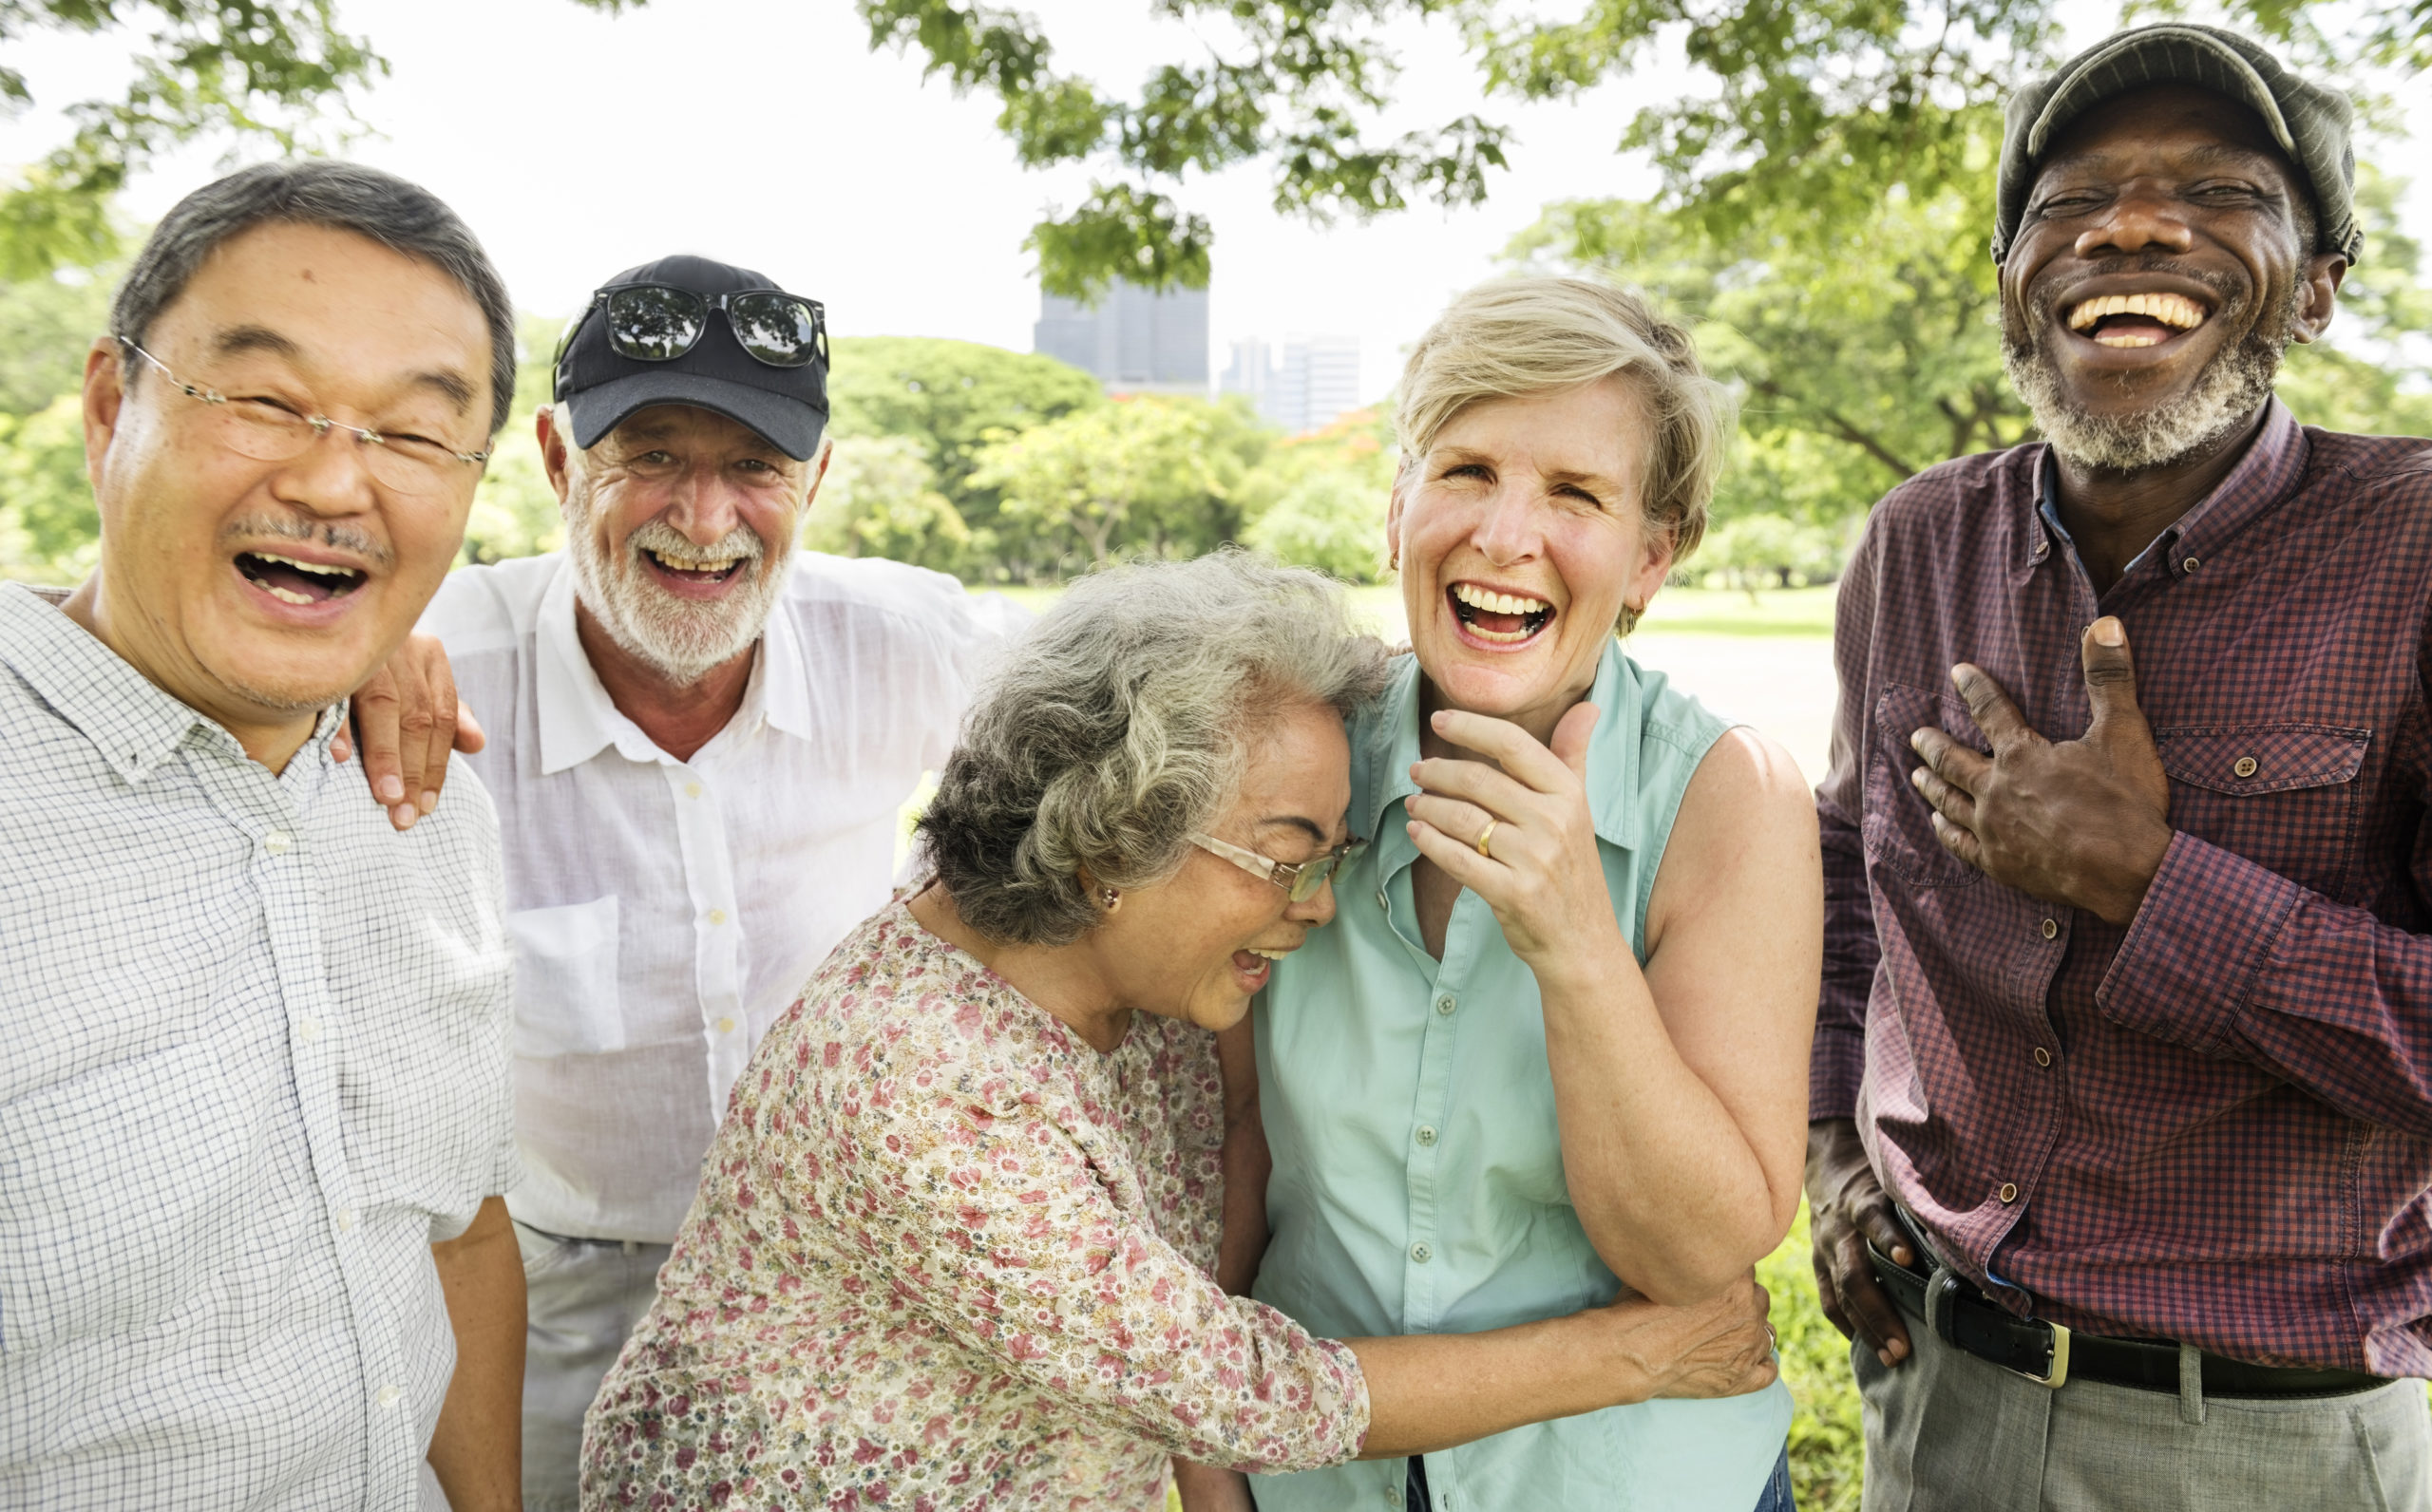 Group of 5 older adults laughing together